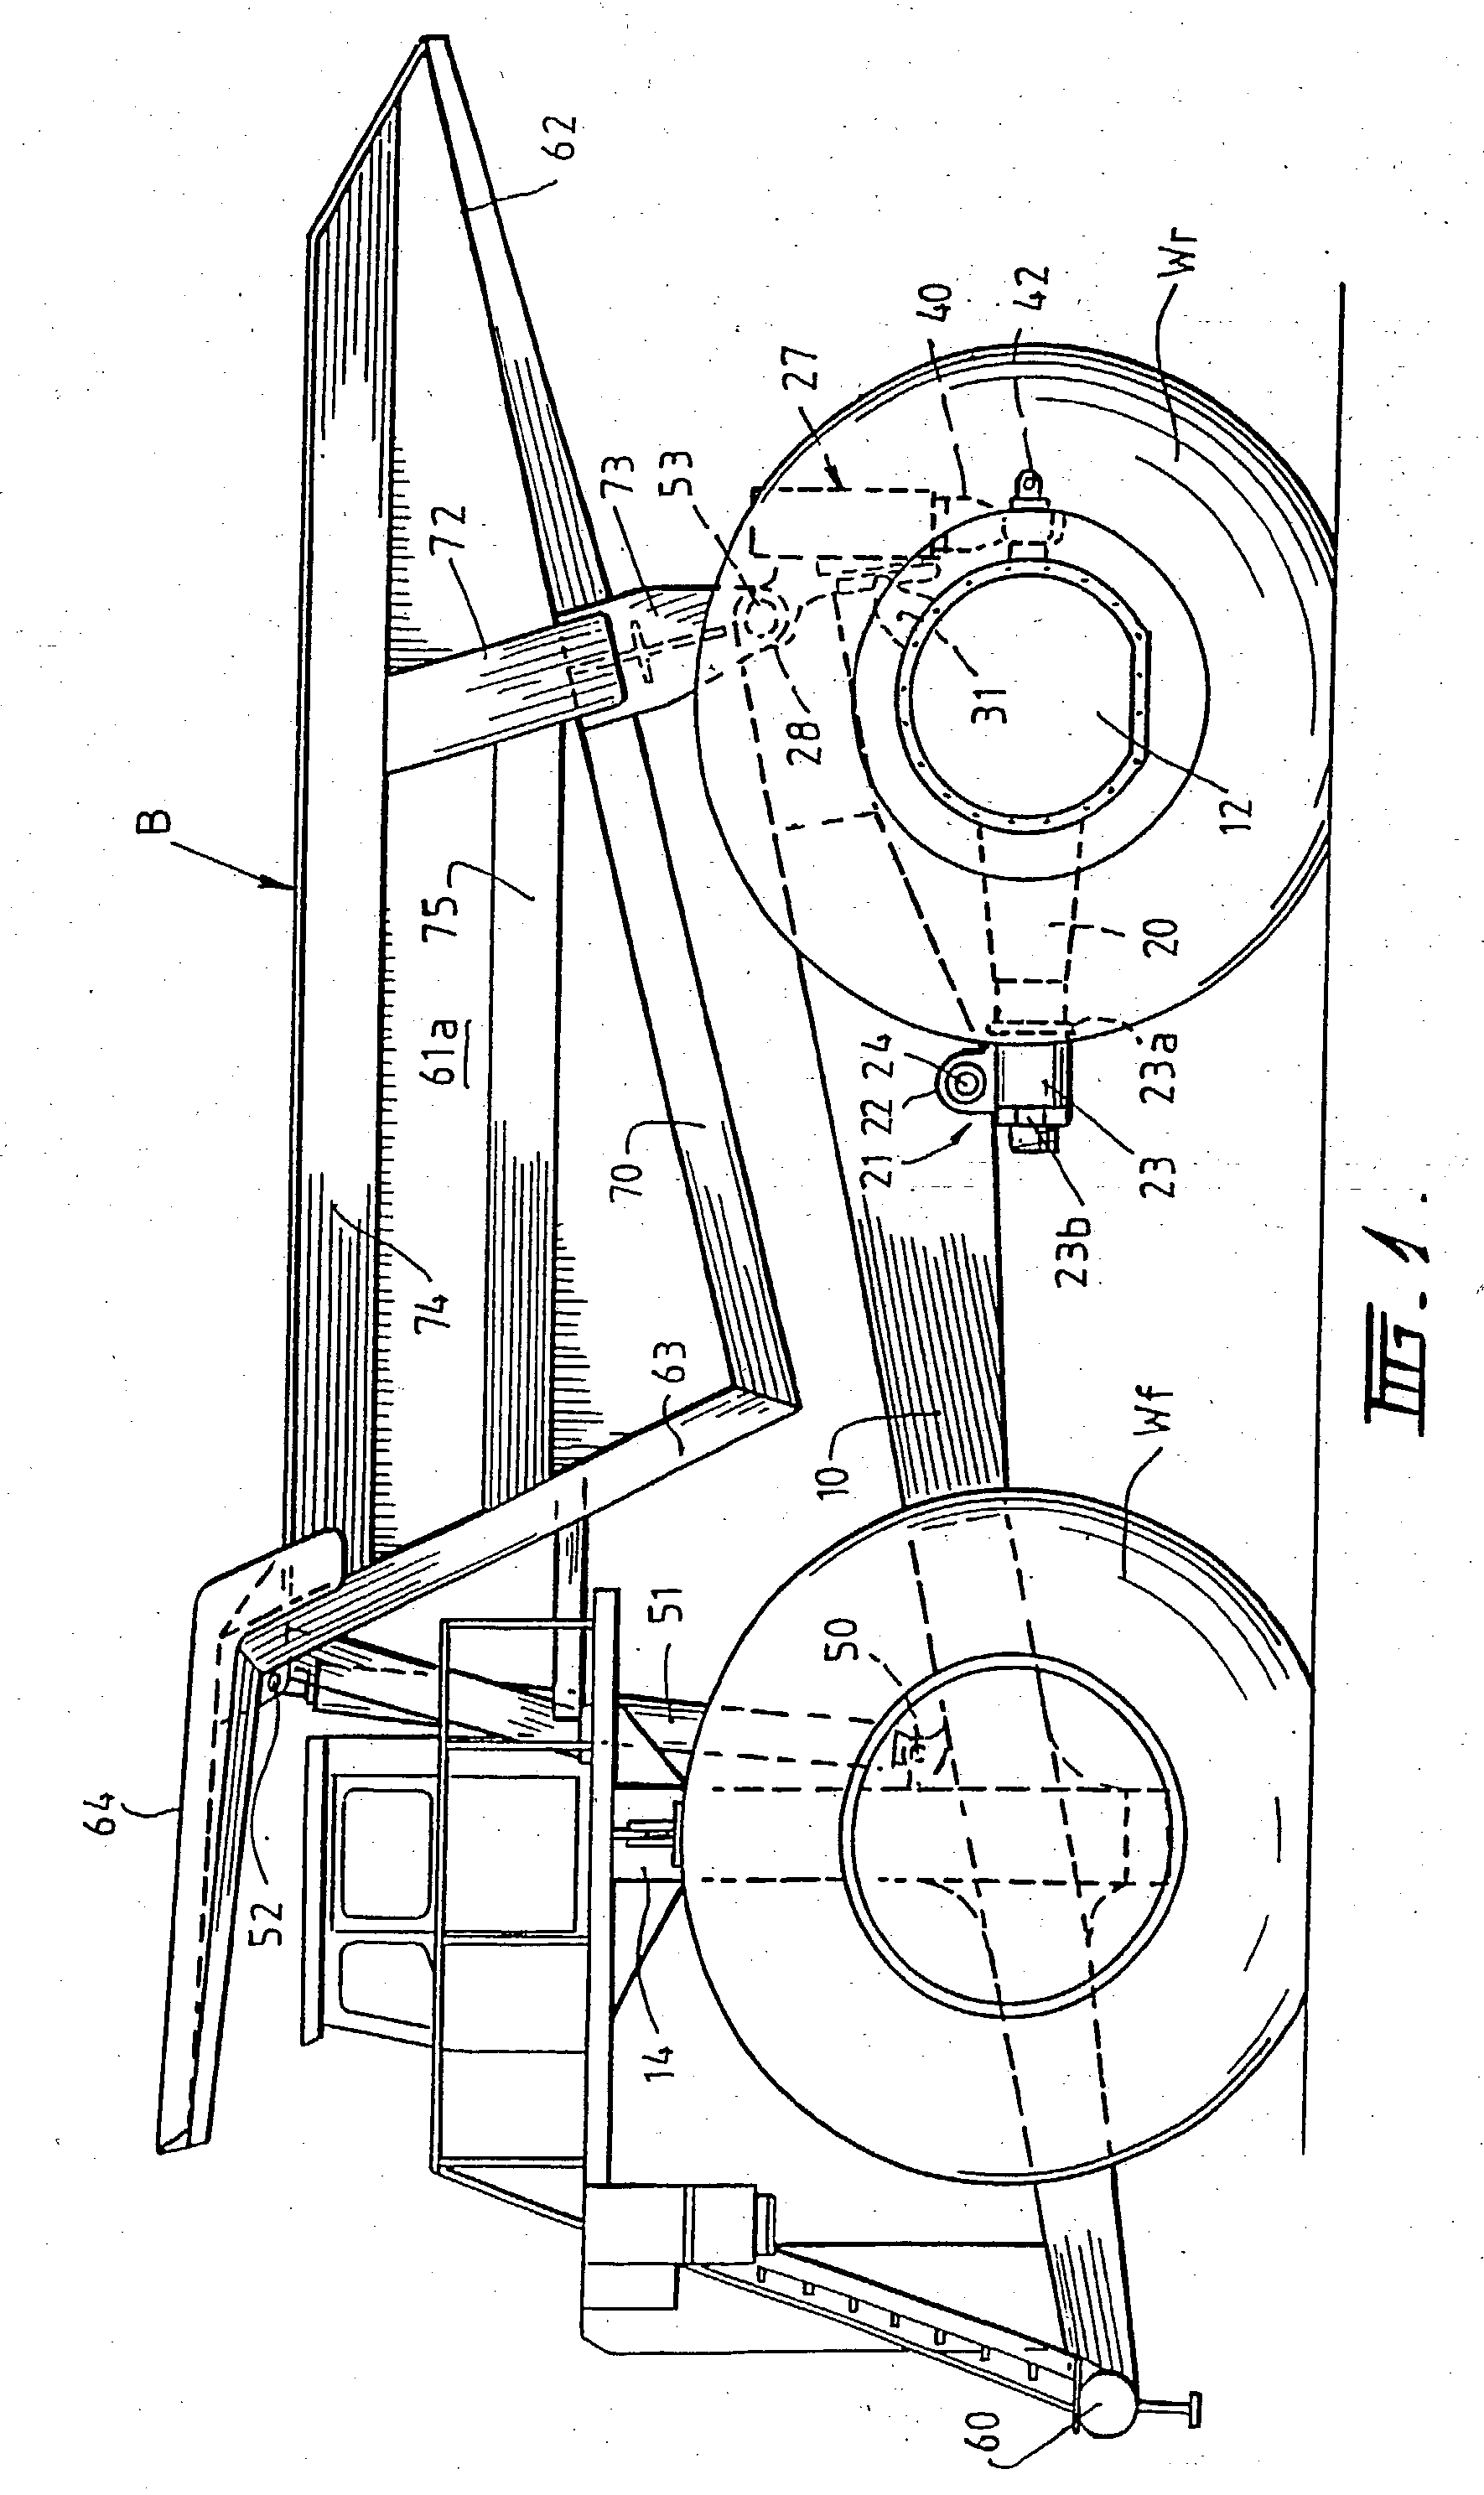 Suspension system and body for large dump trucks